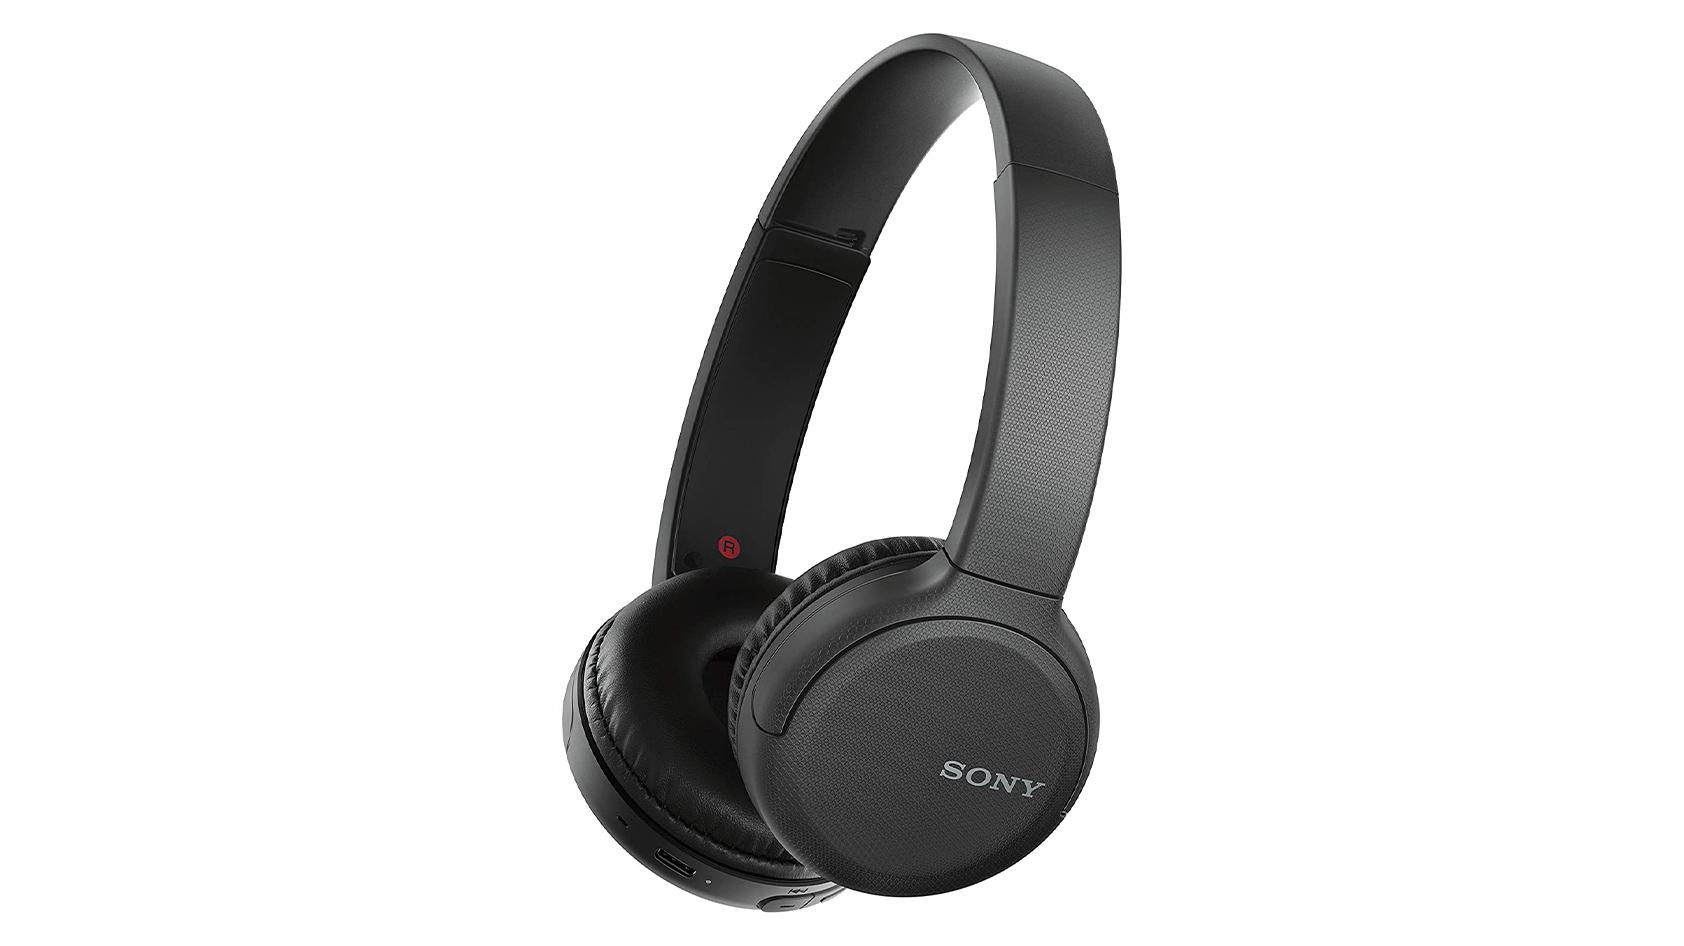 The Sony WH-CH510 on-ear headphones in black against a white background.